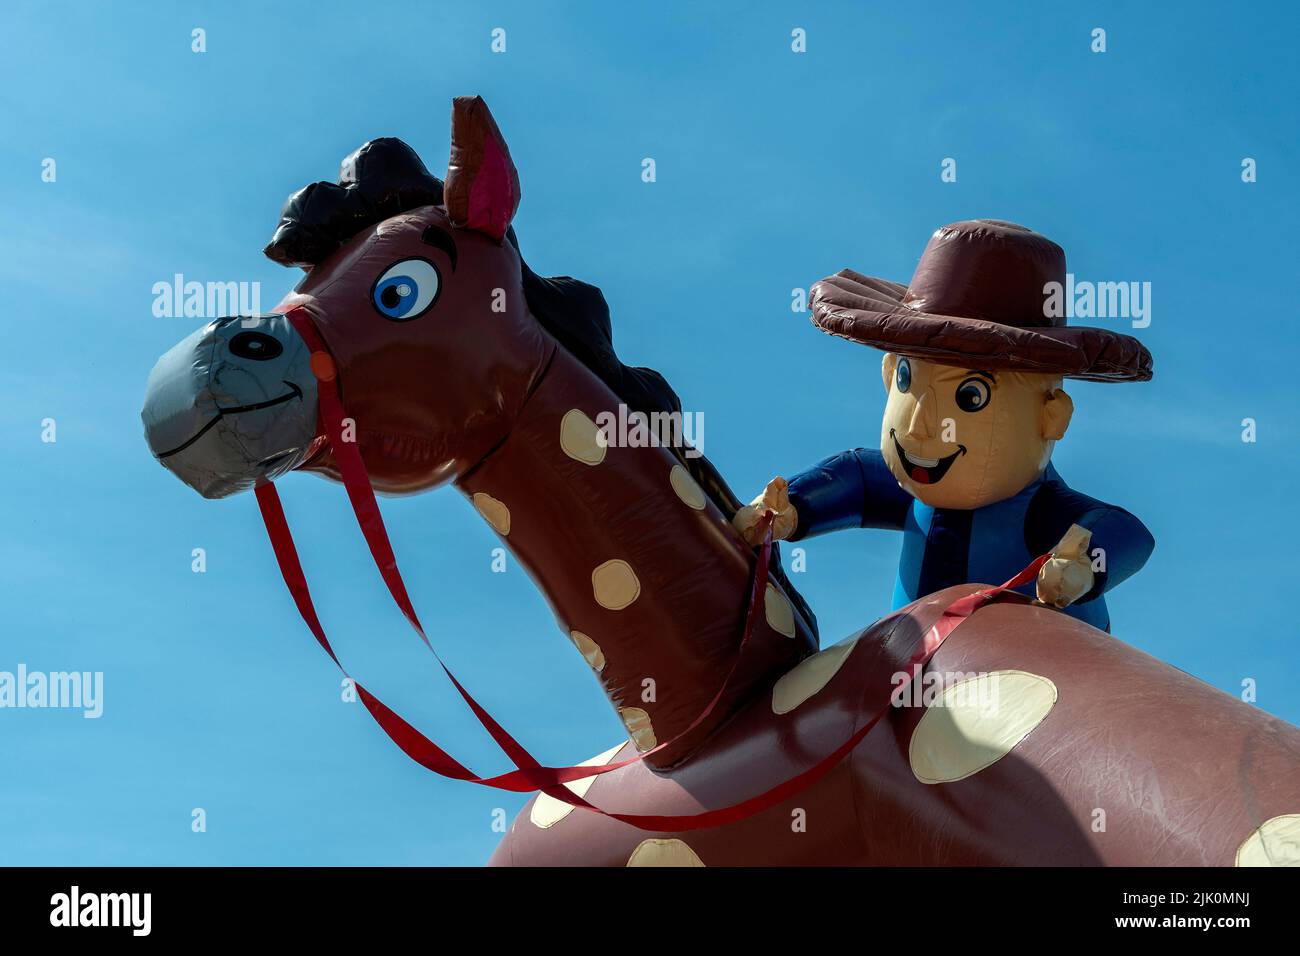 Plastic cowboy toy riding his spotted horse against a background of blue sky Stock Photo